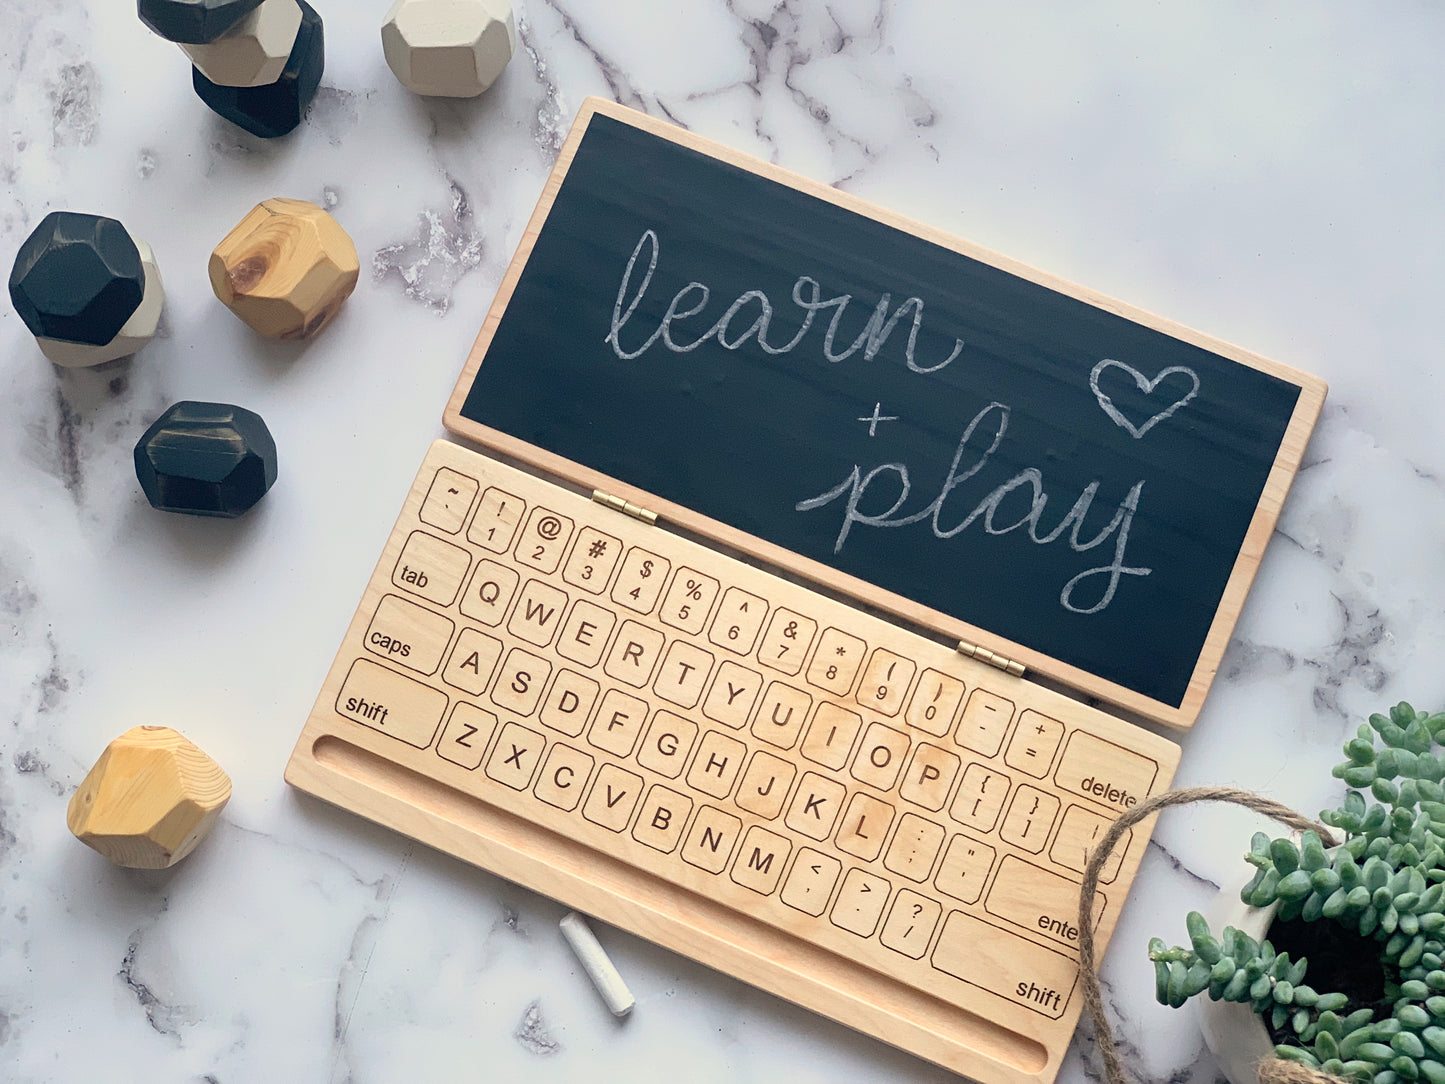 Wooden Laptop Toy Computer with Chalkboard